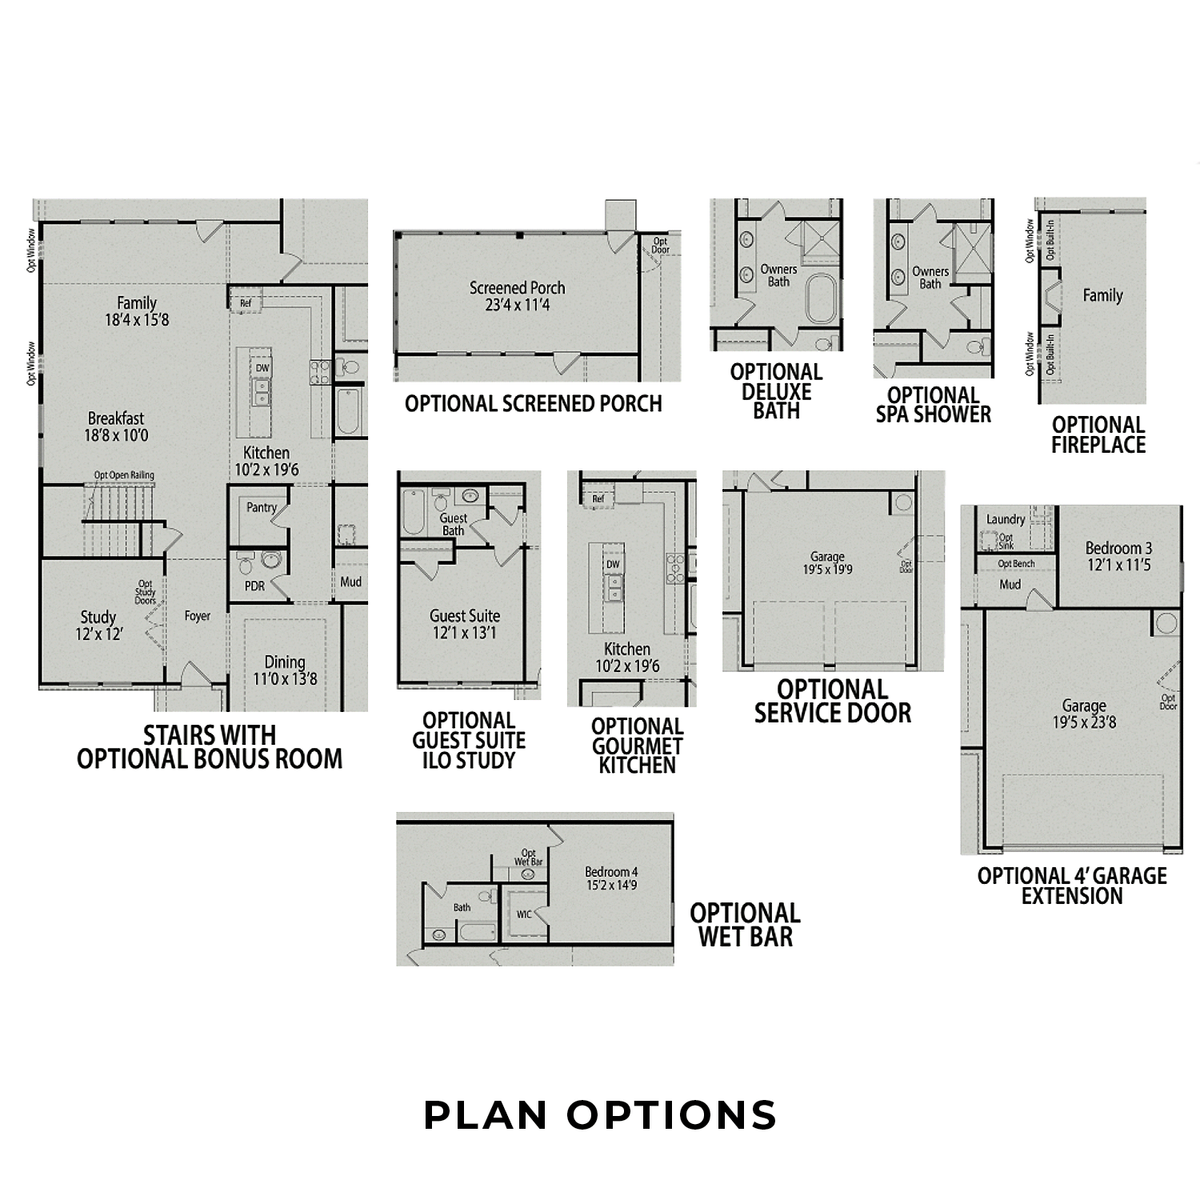 3 - The Magnolia A floor plan layout for 225 Highland Ridge Lane in Davidson Homes' Glenmere community.